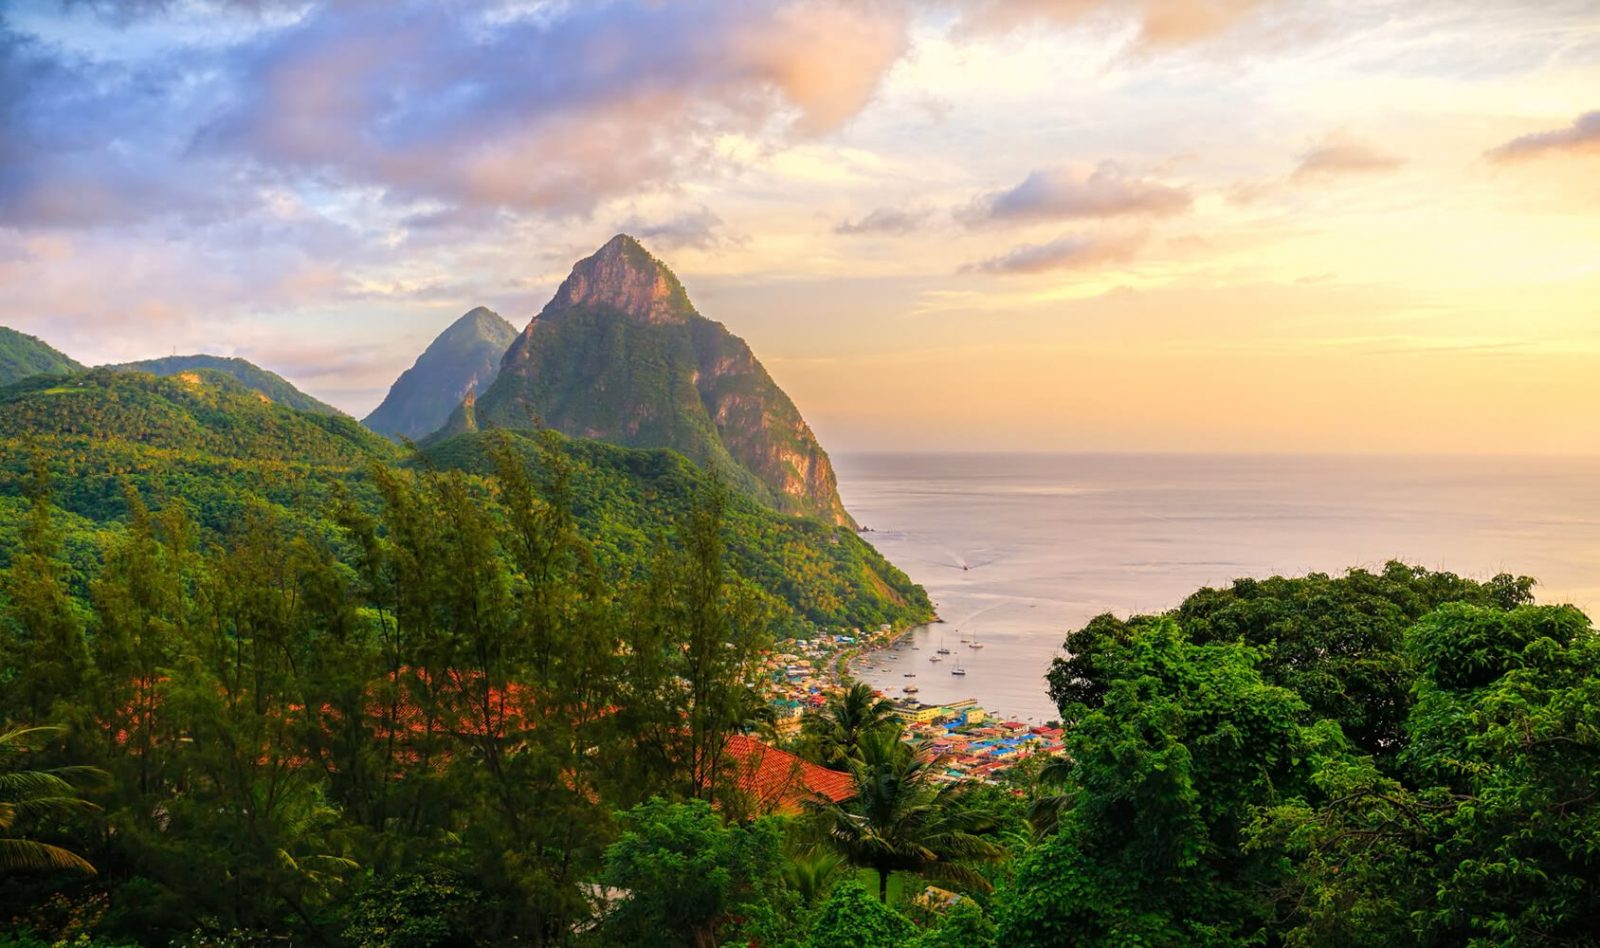 🗺 Can You Locate 18/24 of These Countries in the World? Saint Lucia